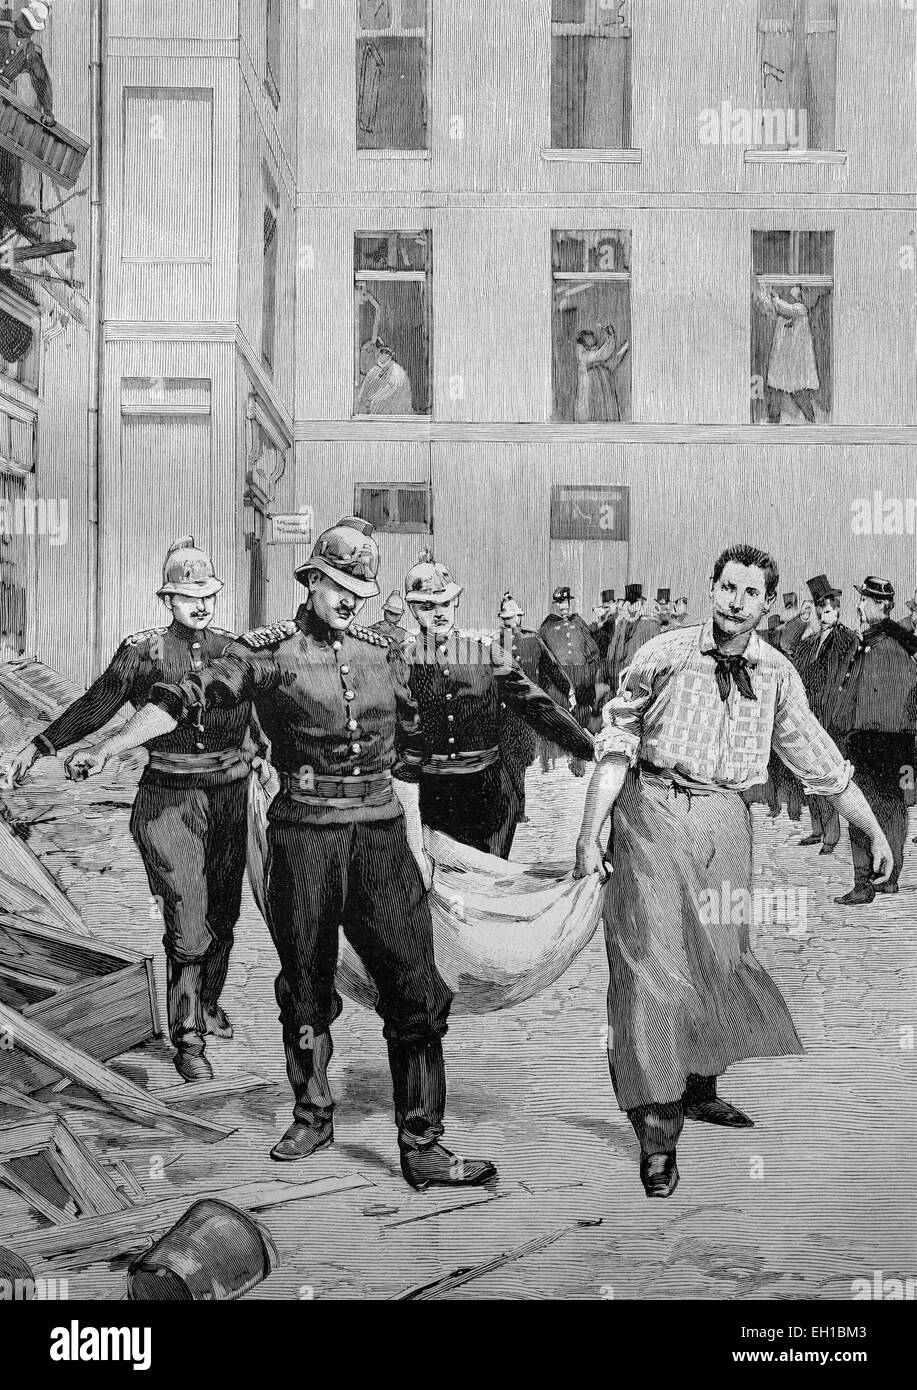 Dynamite explosion in Paris, France, victims being carried away, historical illustration, ca. 1893 Stock Photo